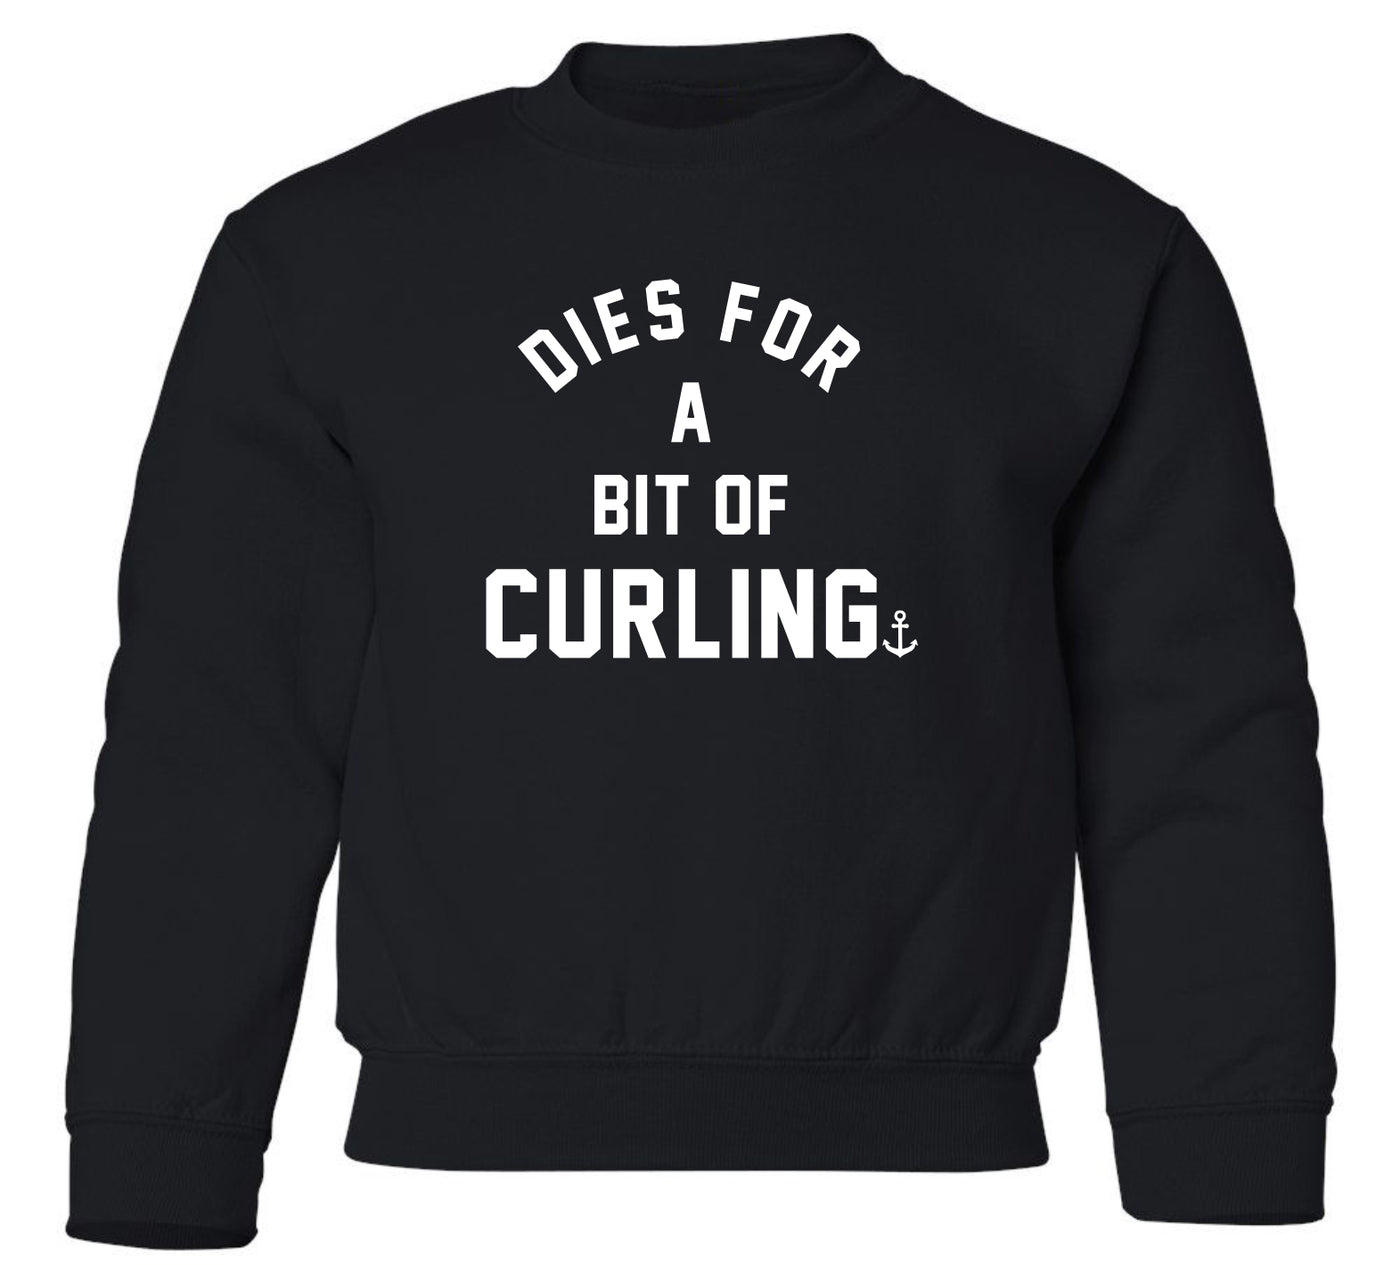 "Dies For A Bit Of Curling" Toddler/Youth Crewneck Sweatshirt